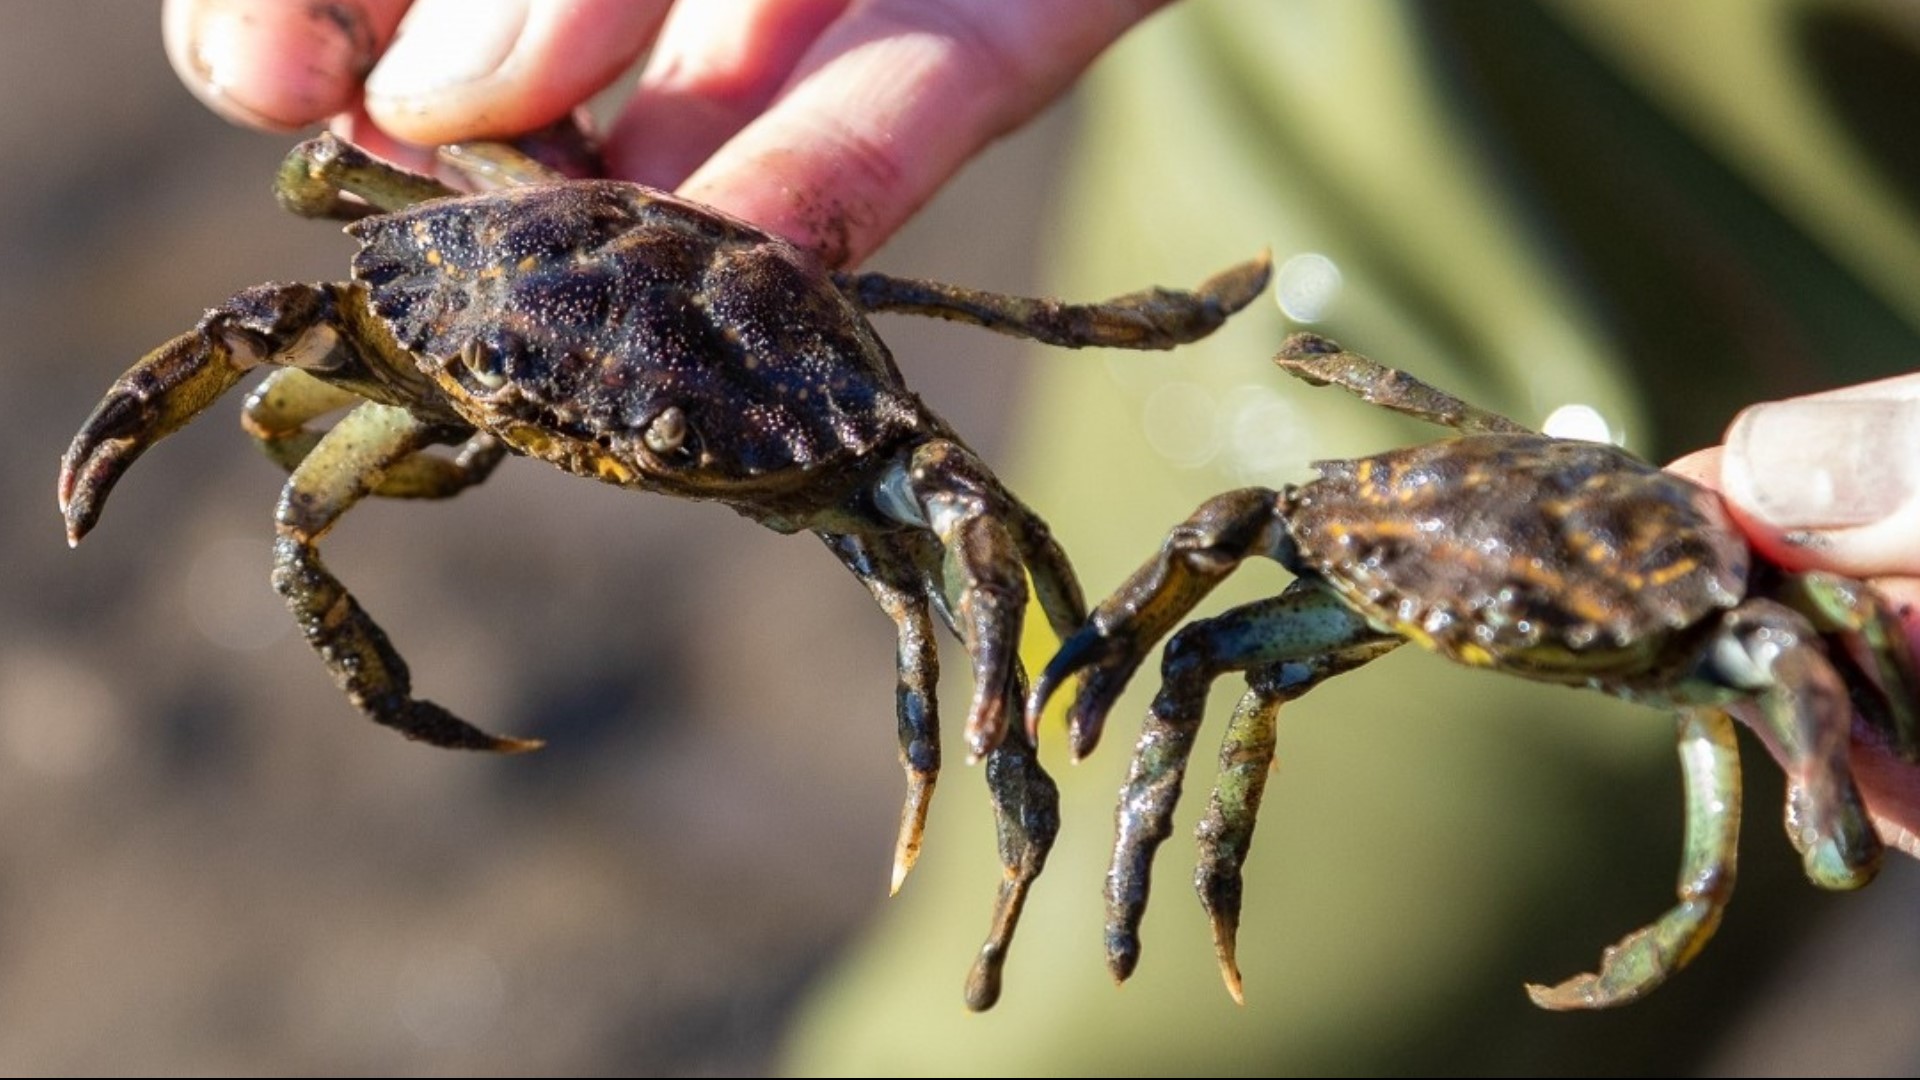 European green crabs can consume shellfish and other native marine life, and destroy habitats that much of the food web relies on.